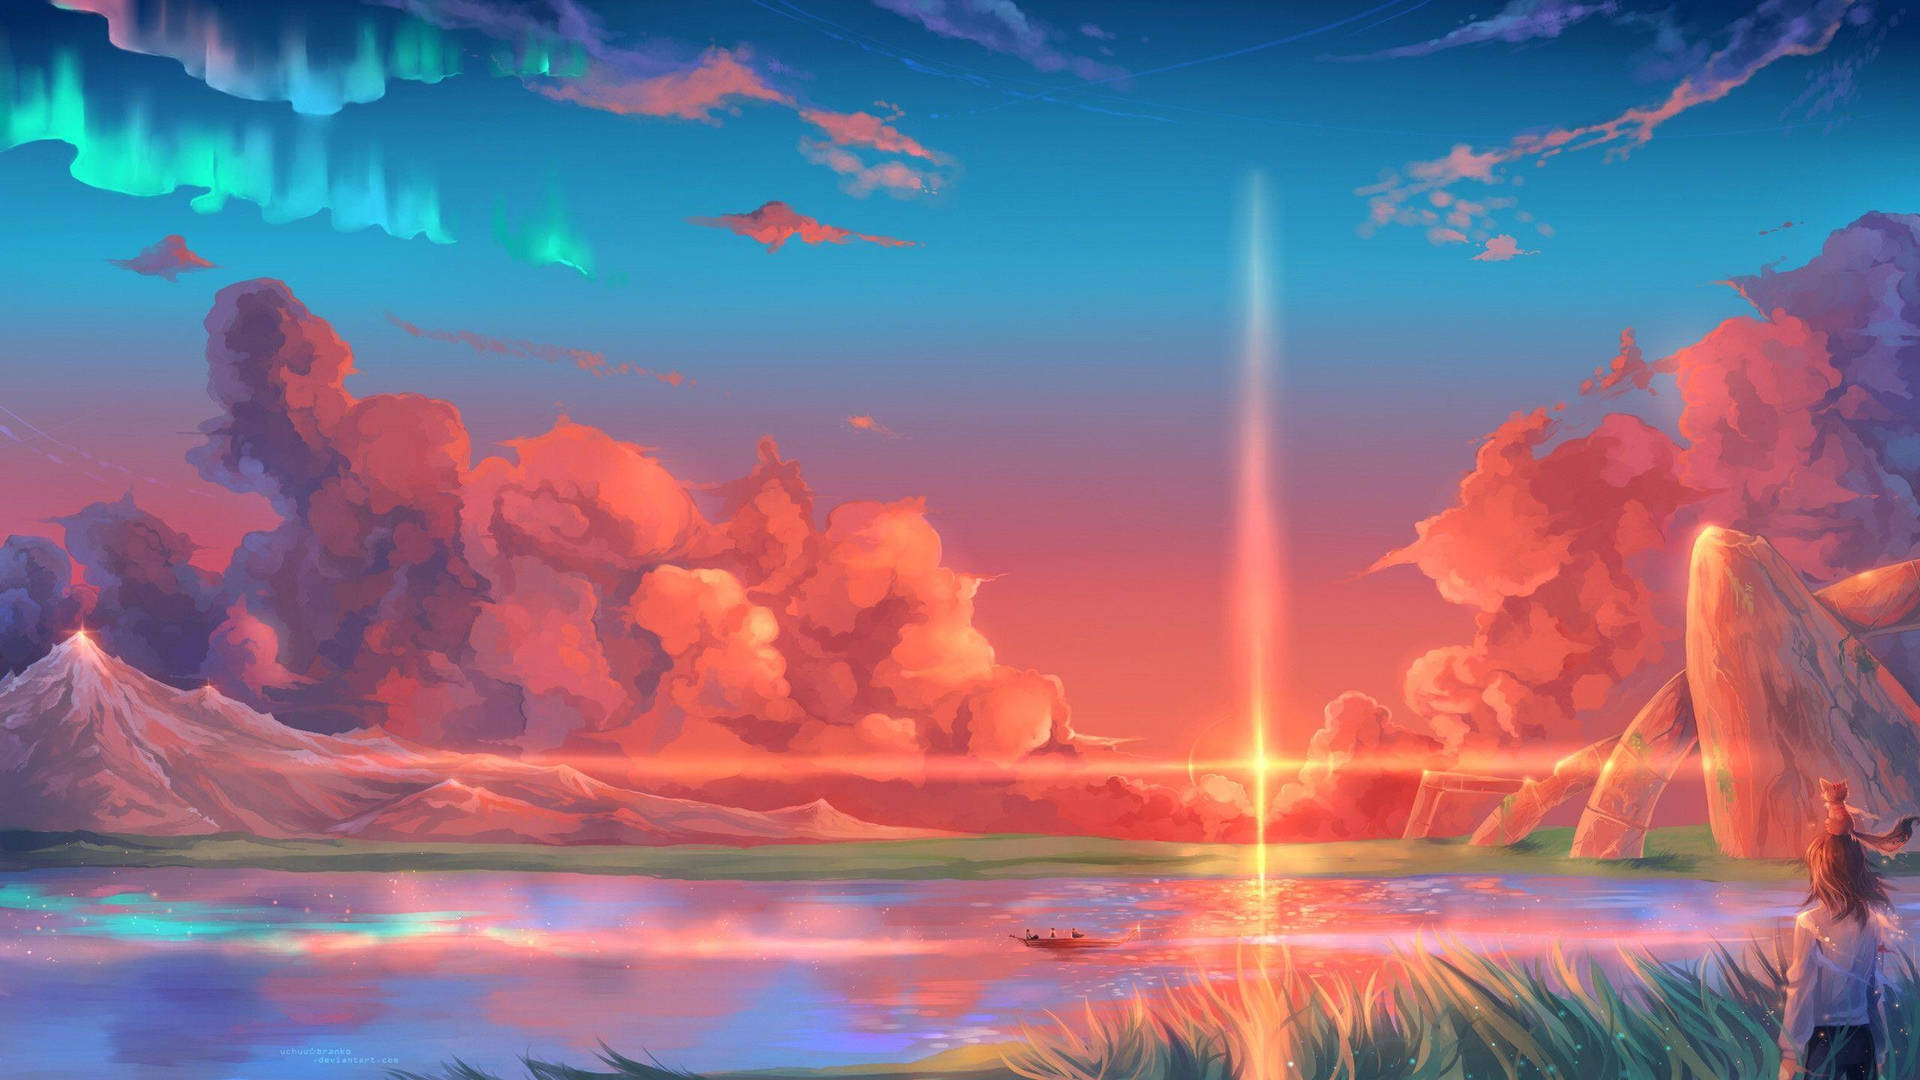 Aesthetic Anime Scenery Of A Sunset Background